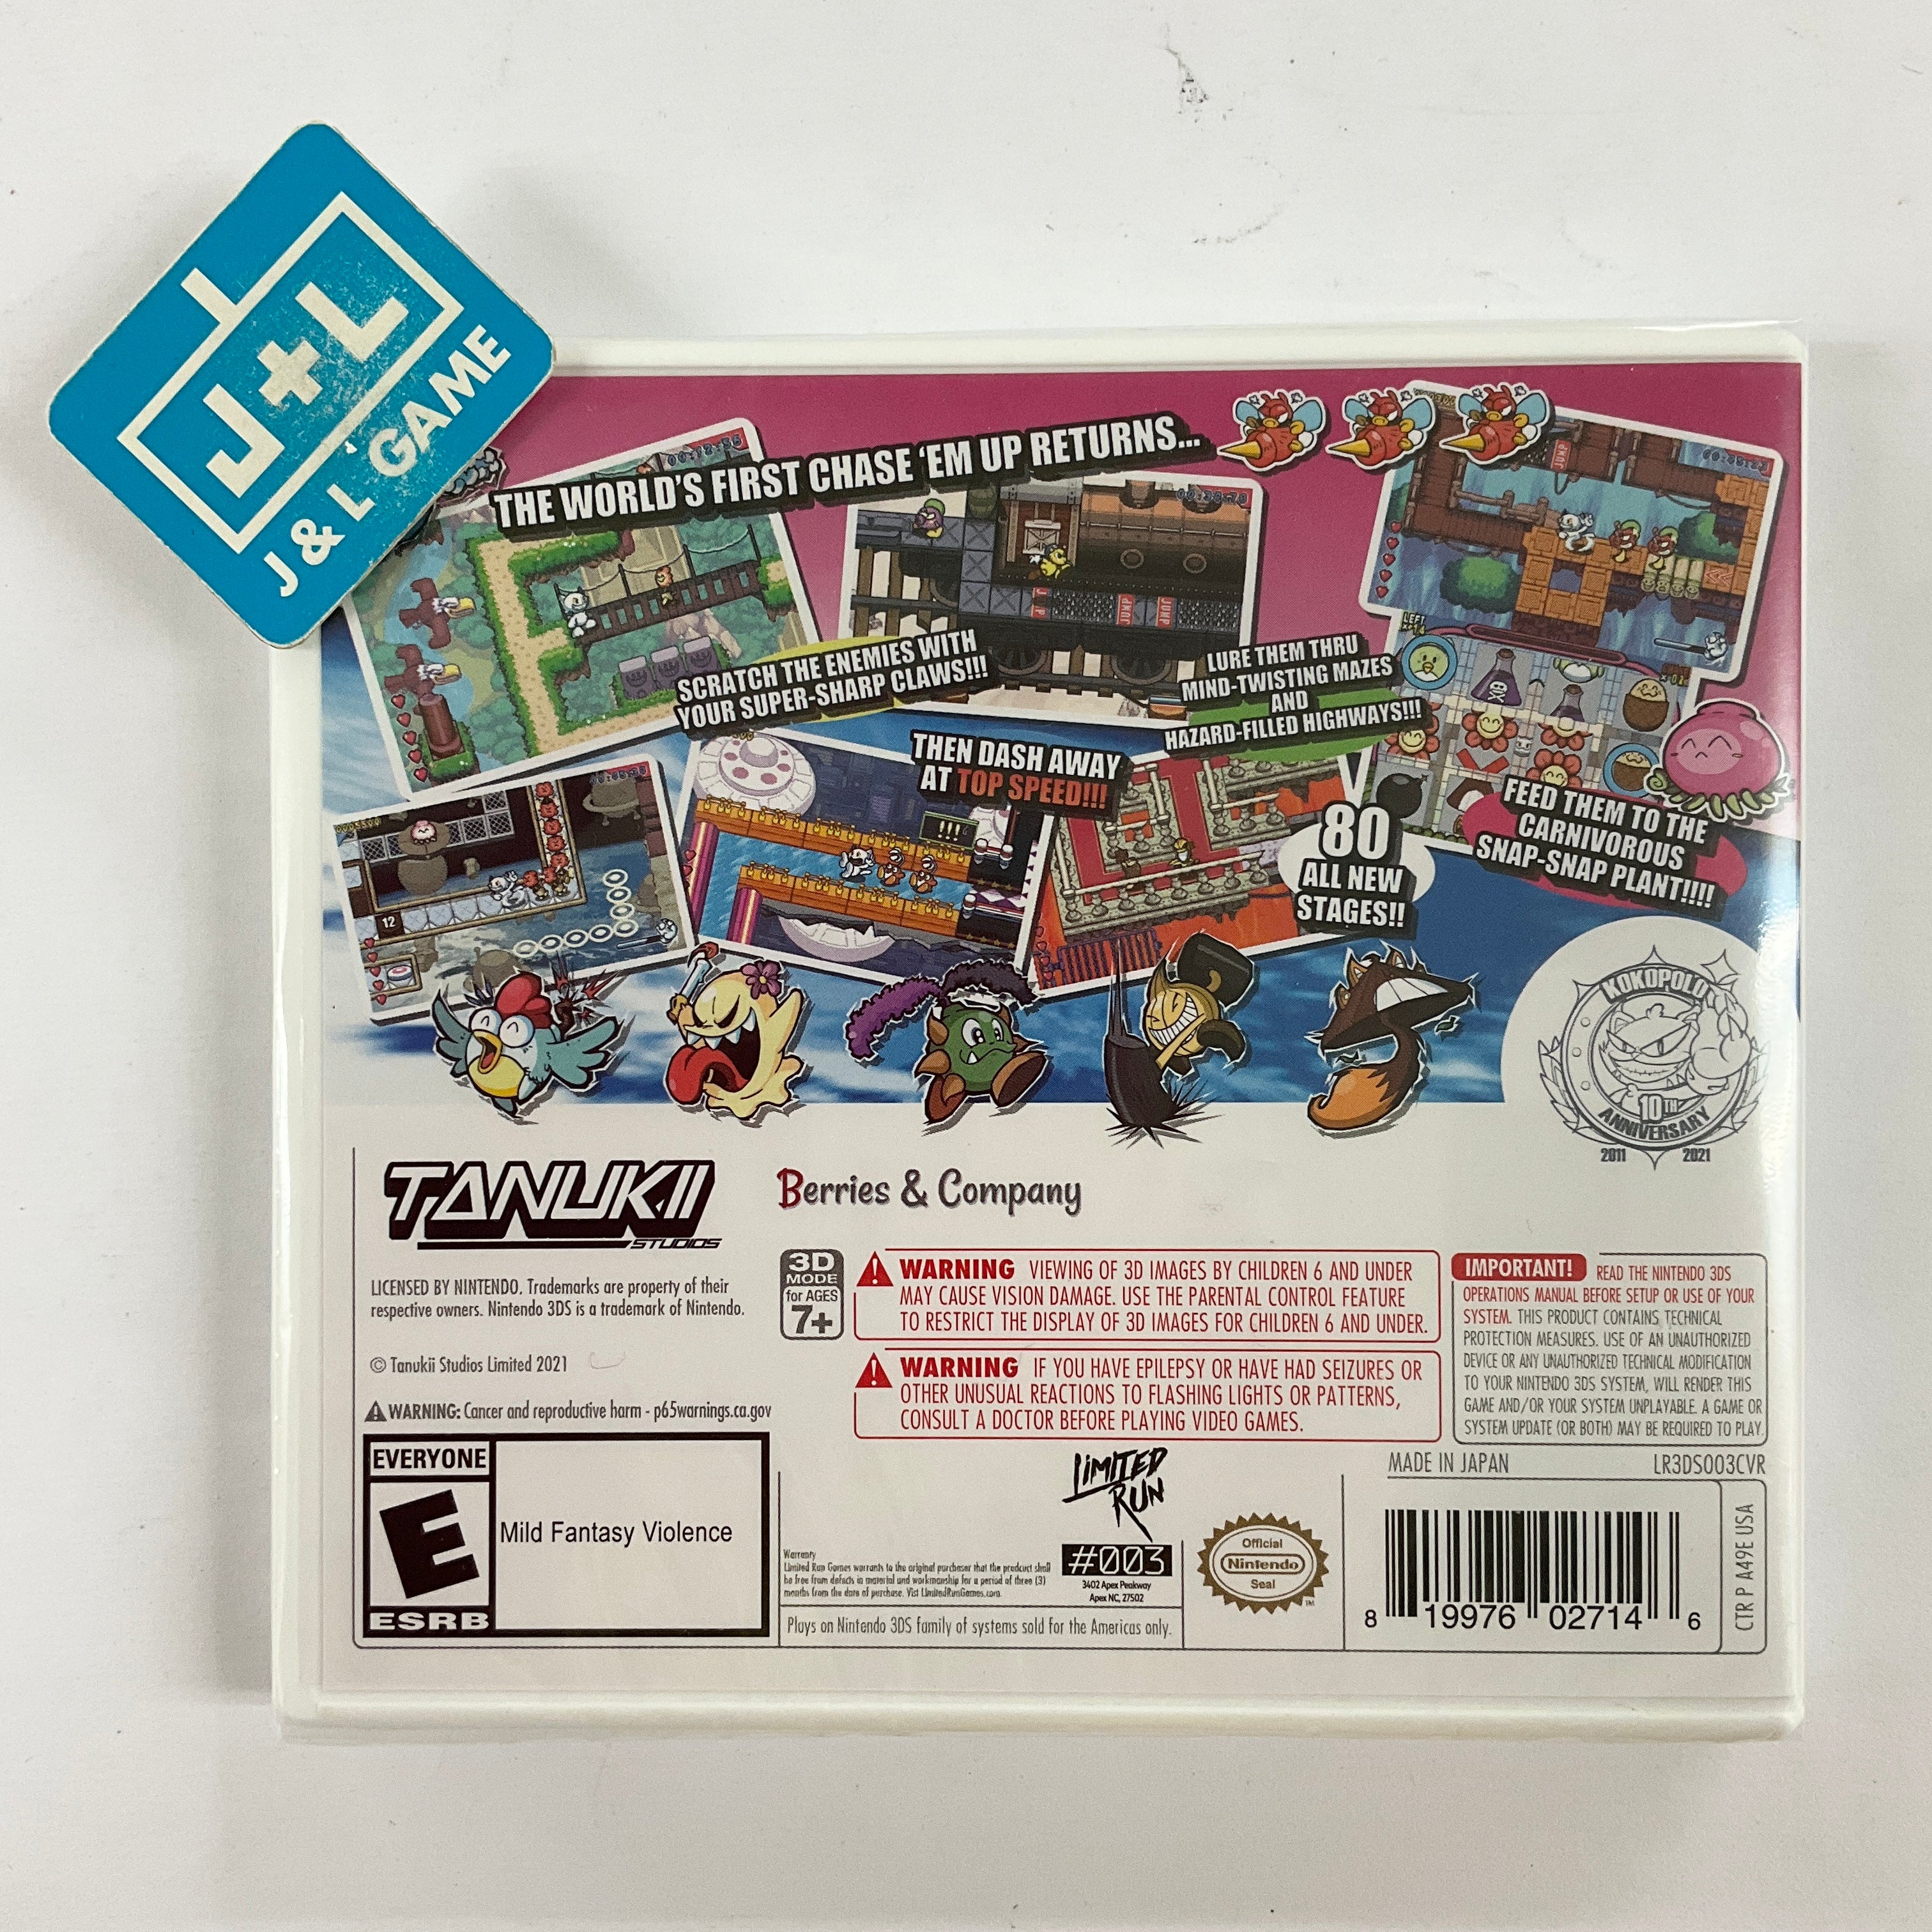 Go! Go! Kokopolo 3D: Space Recipe for Disaster - Nintendo 3DS Video Games Limited Run Games   